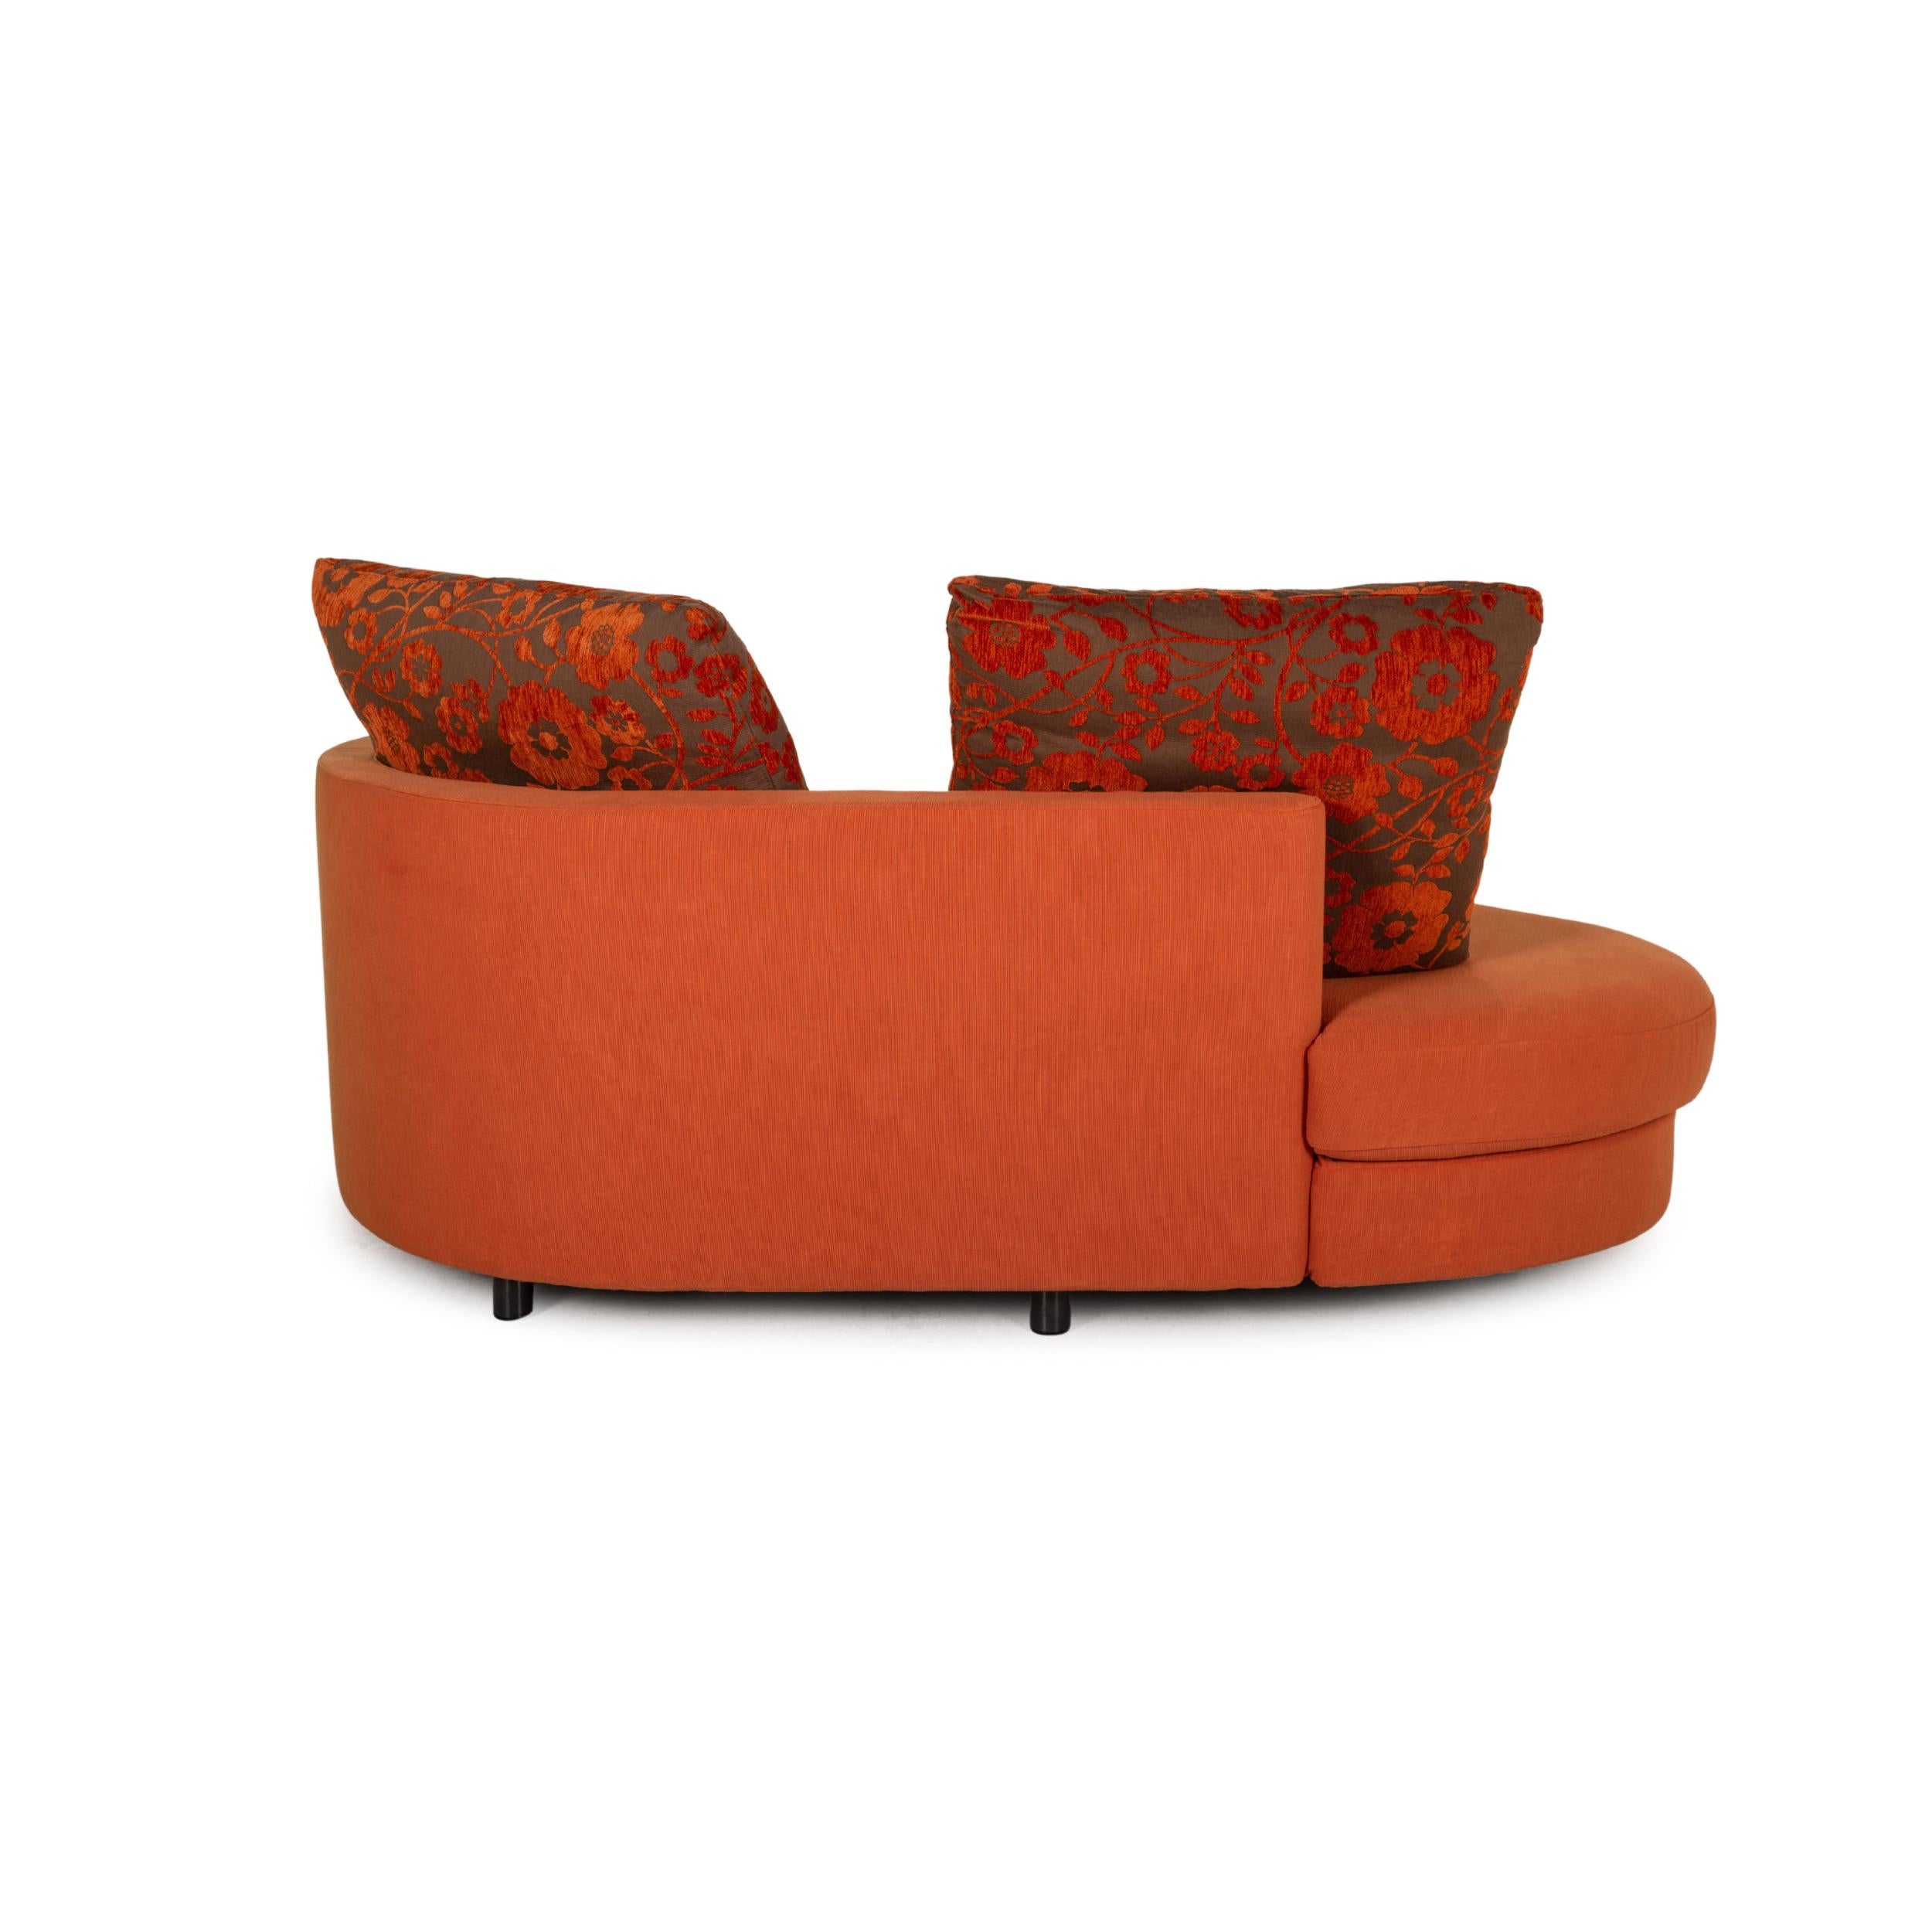 Rolf Benz 4500 fabric sofa orange two-seater couch For Sale at 1stDibs